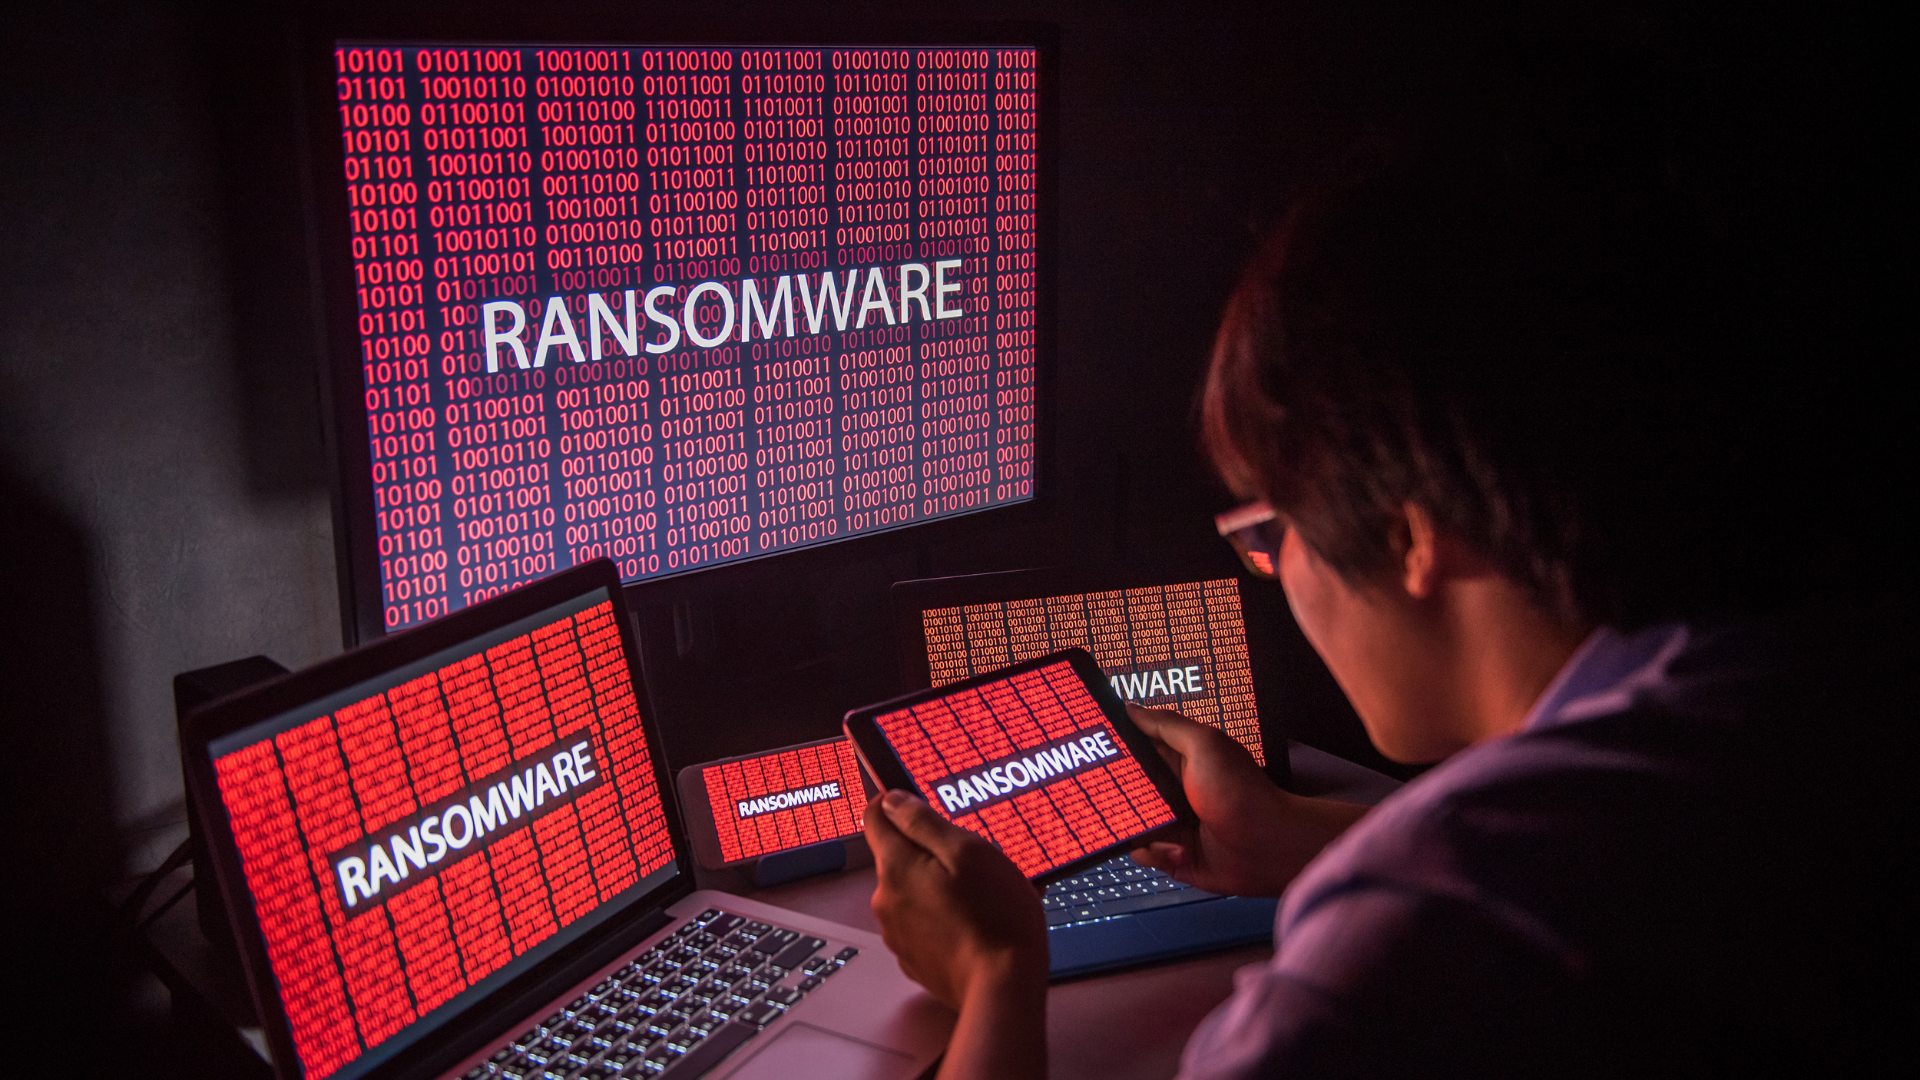 Person stares at devices infected by malware, wondering how to prevent ransomware next time